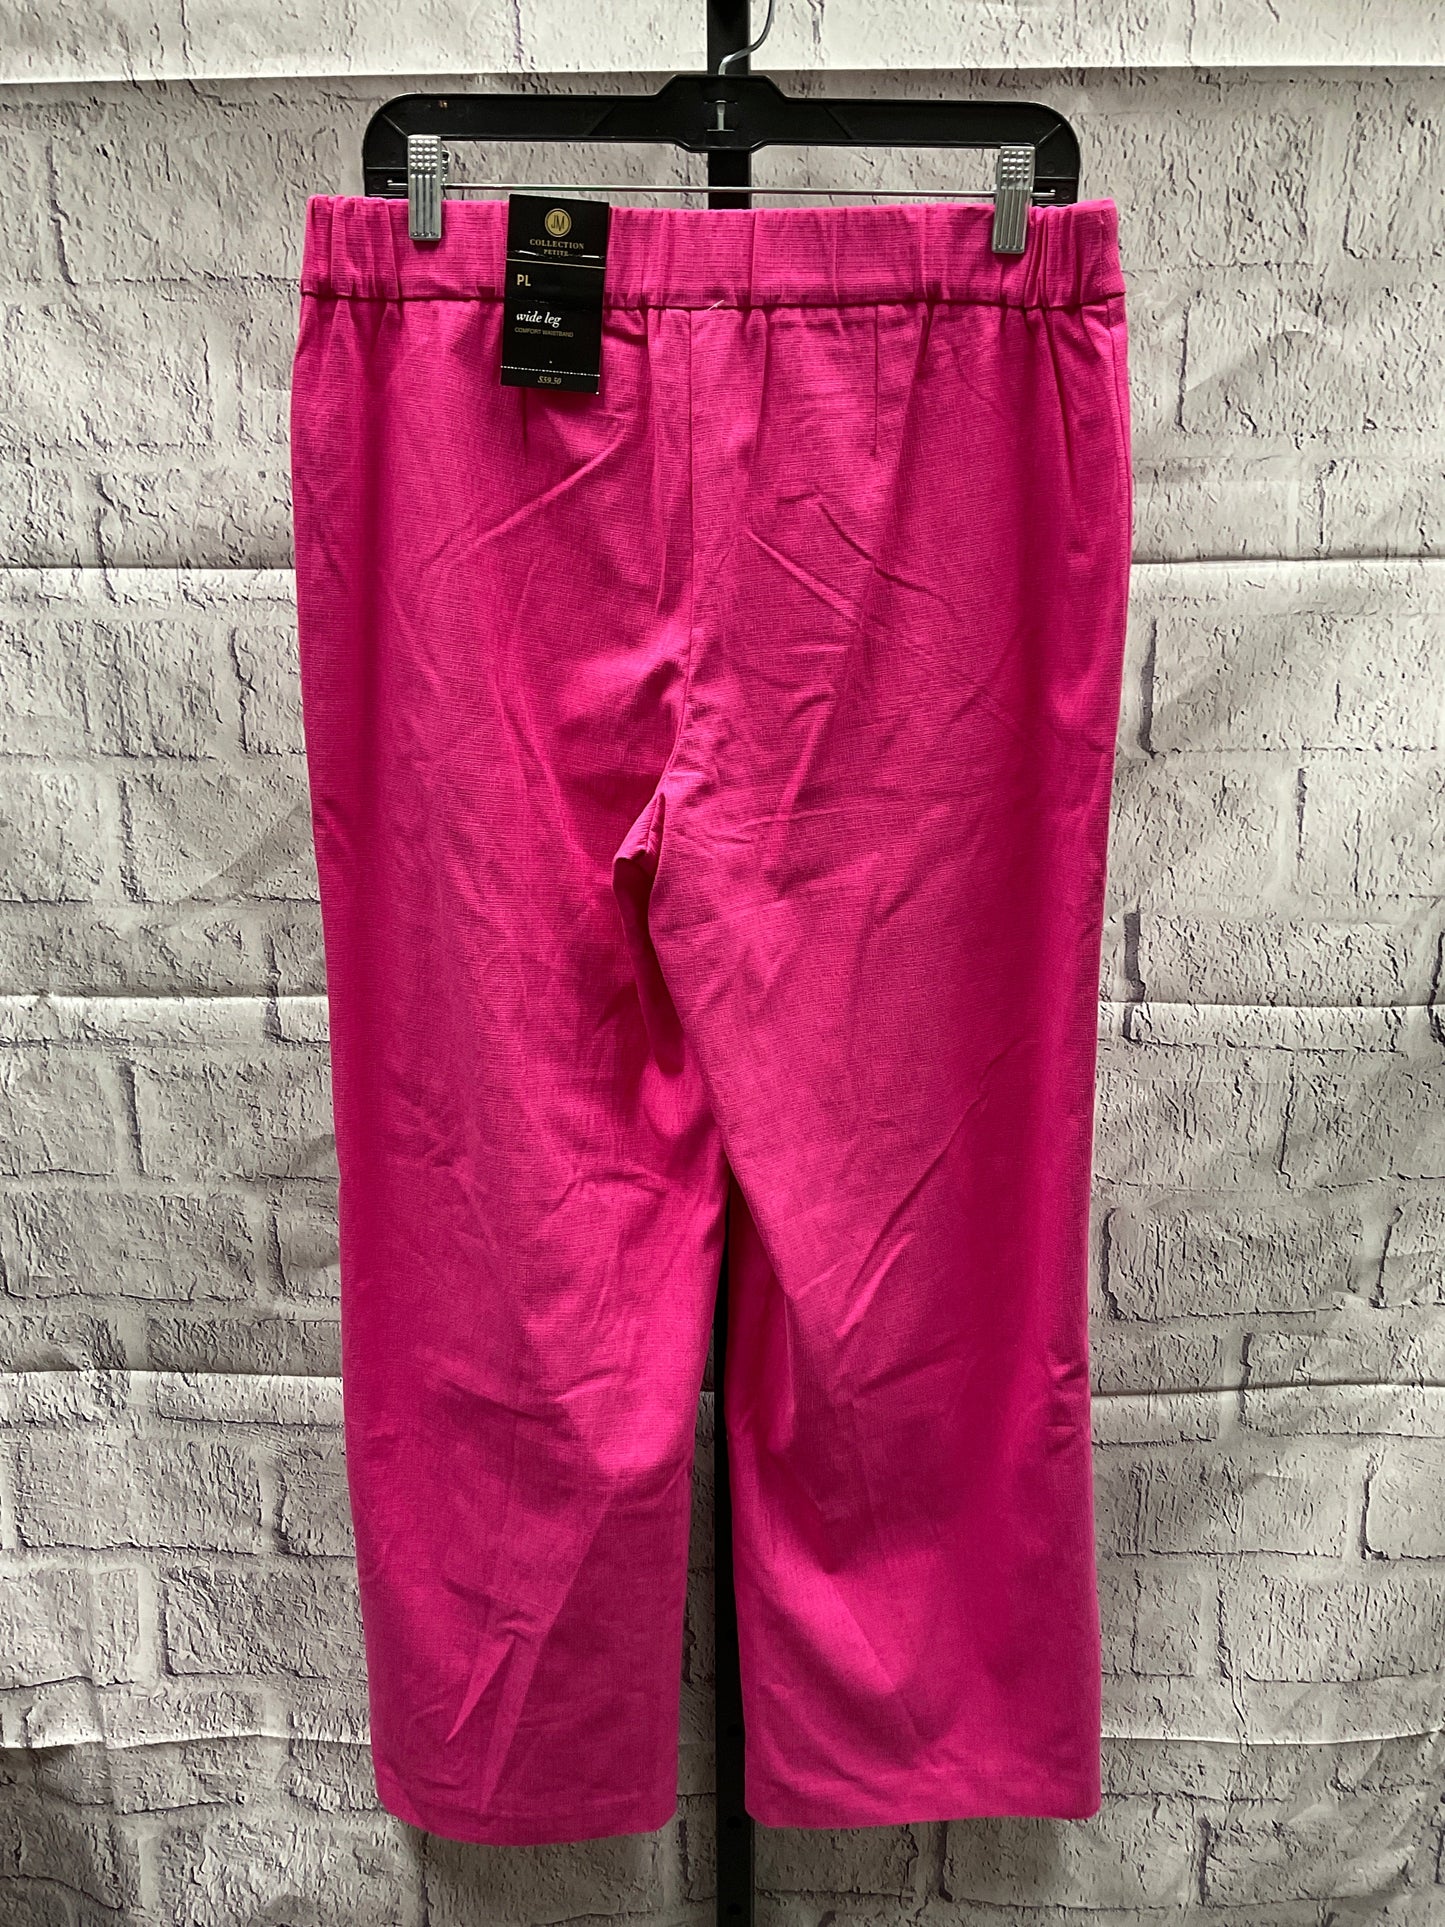 Pants Palazzo By Jm Collections  Size: Petite Large